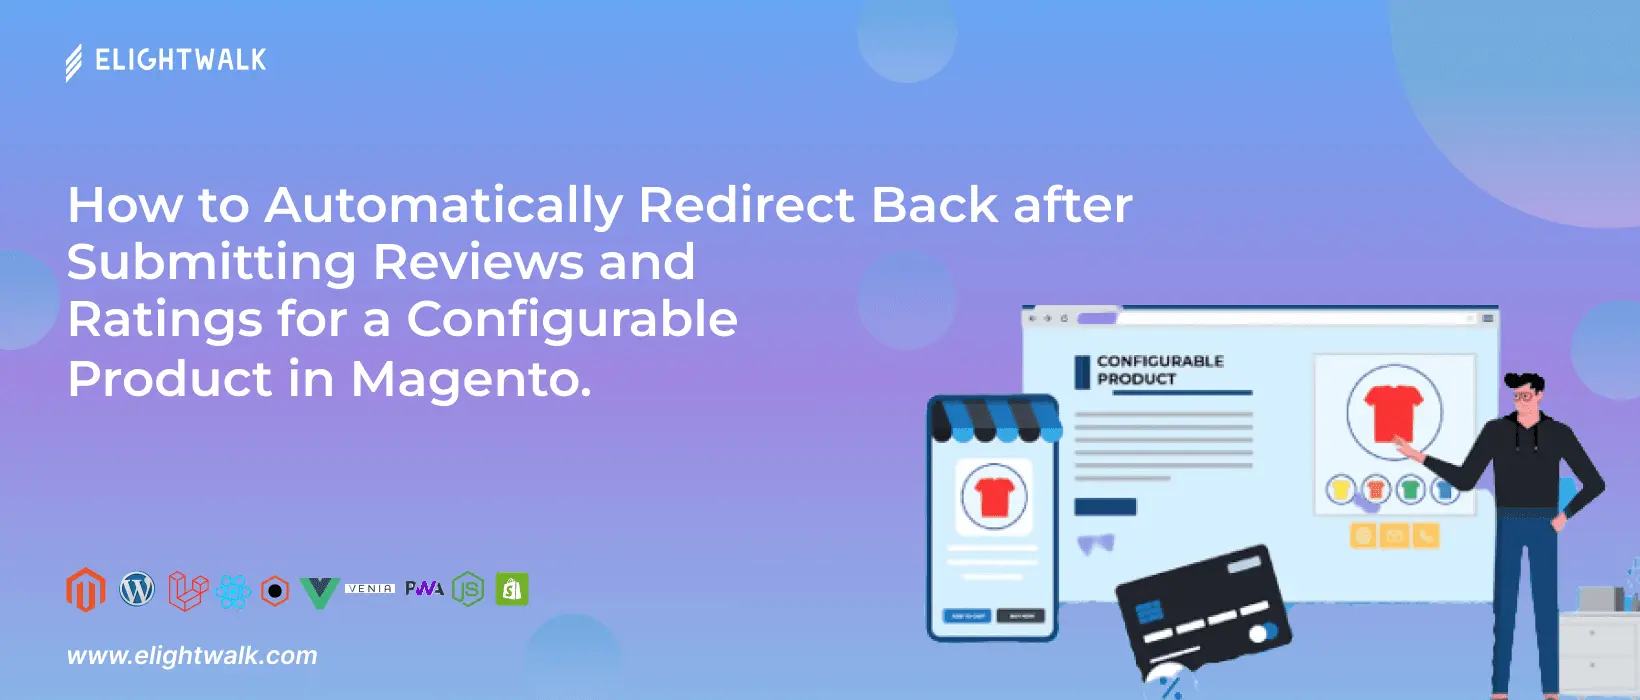 How to Automatically Redirect Back after Submitting Reviews and Ratings for a Configurable Product in Magento